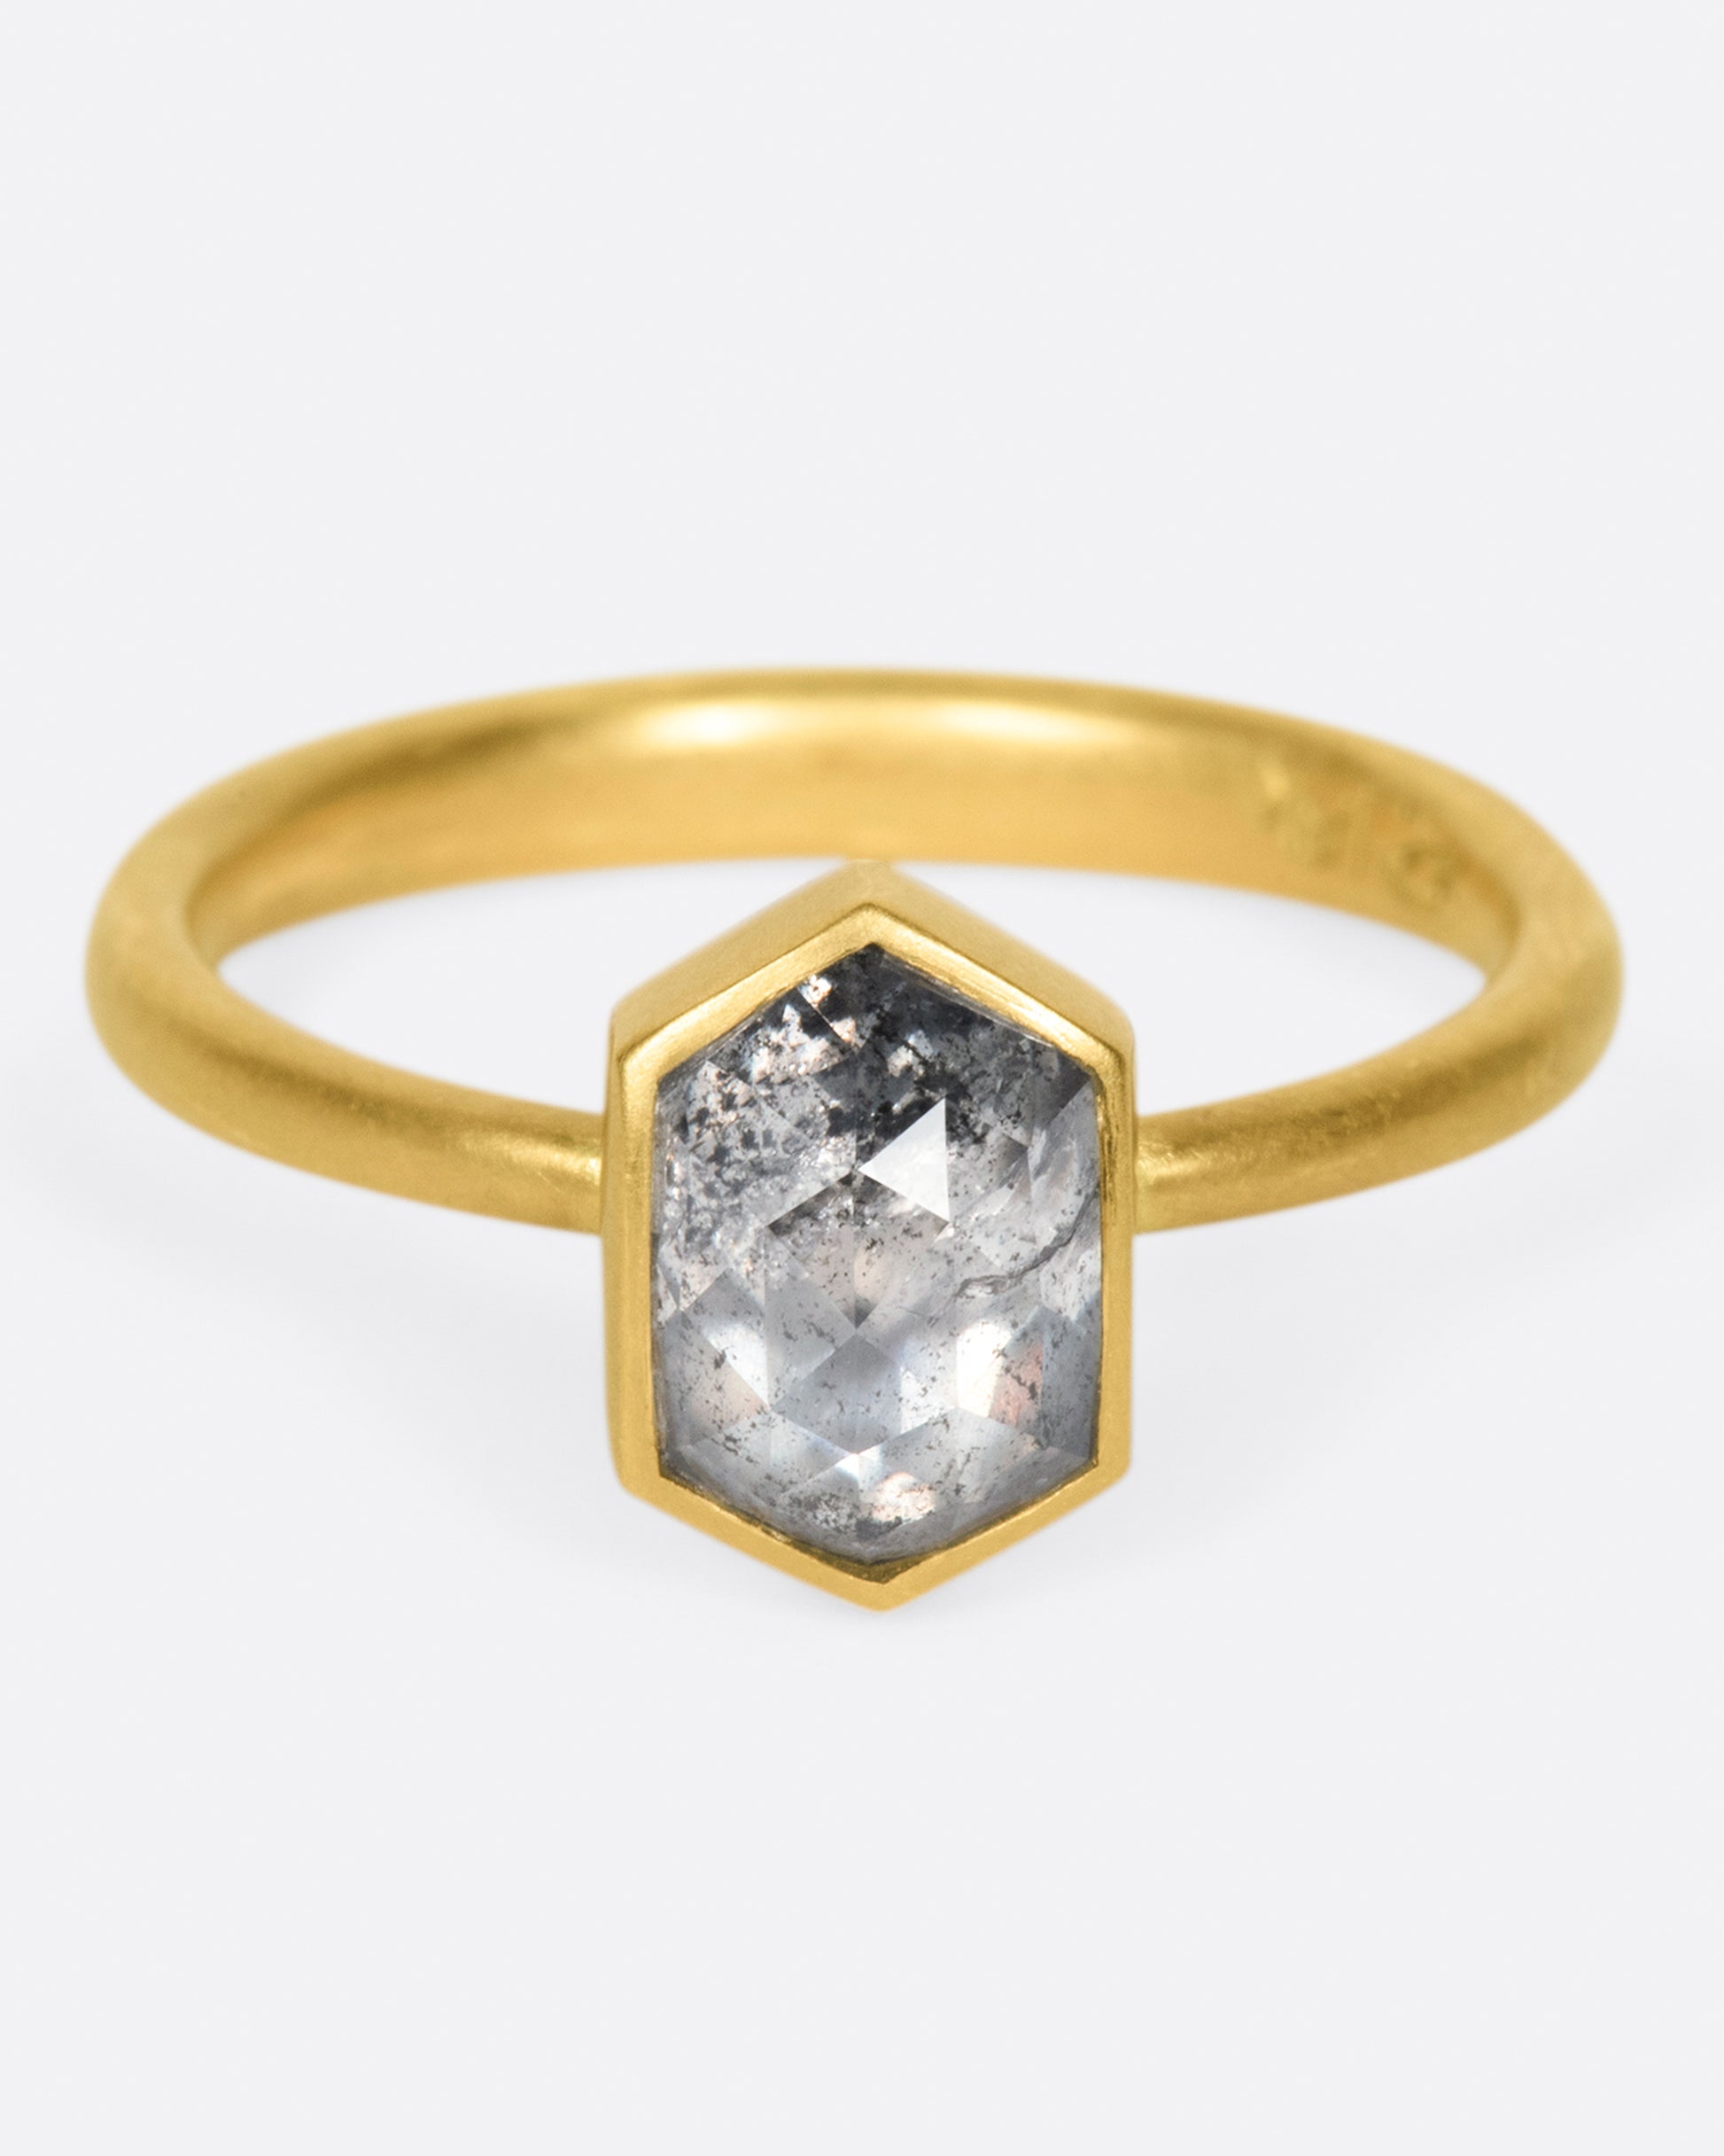 A salt and peppery hexagonal diamond shines in a bezel setting atop this ring.